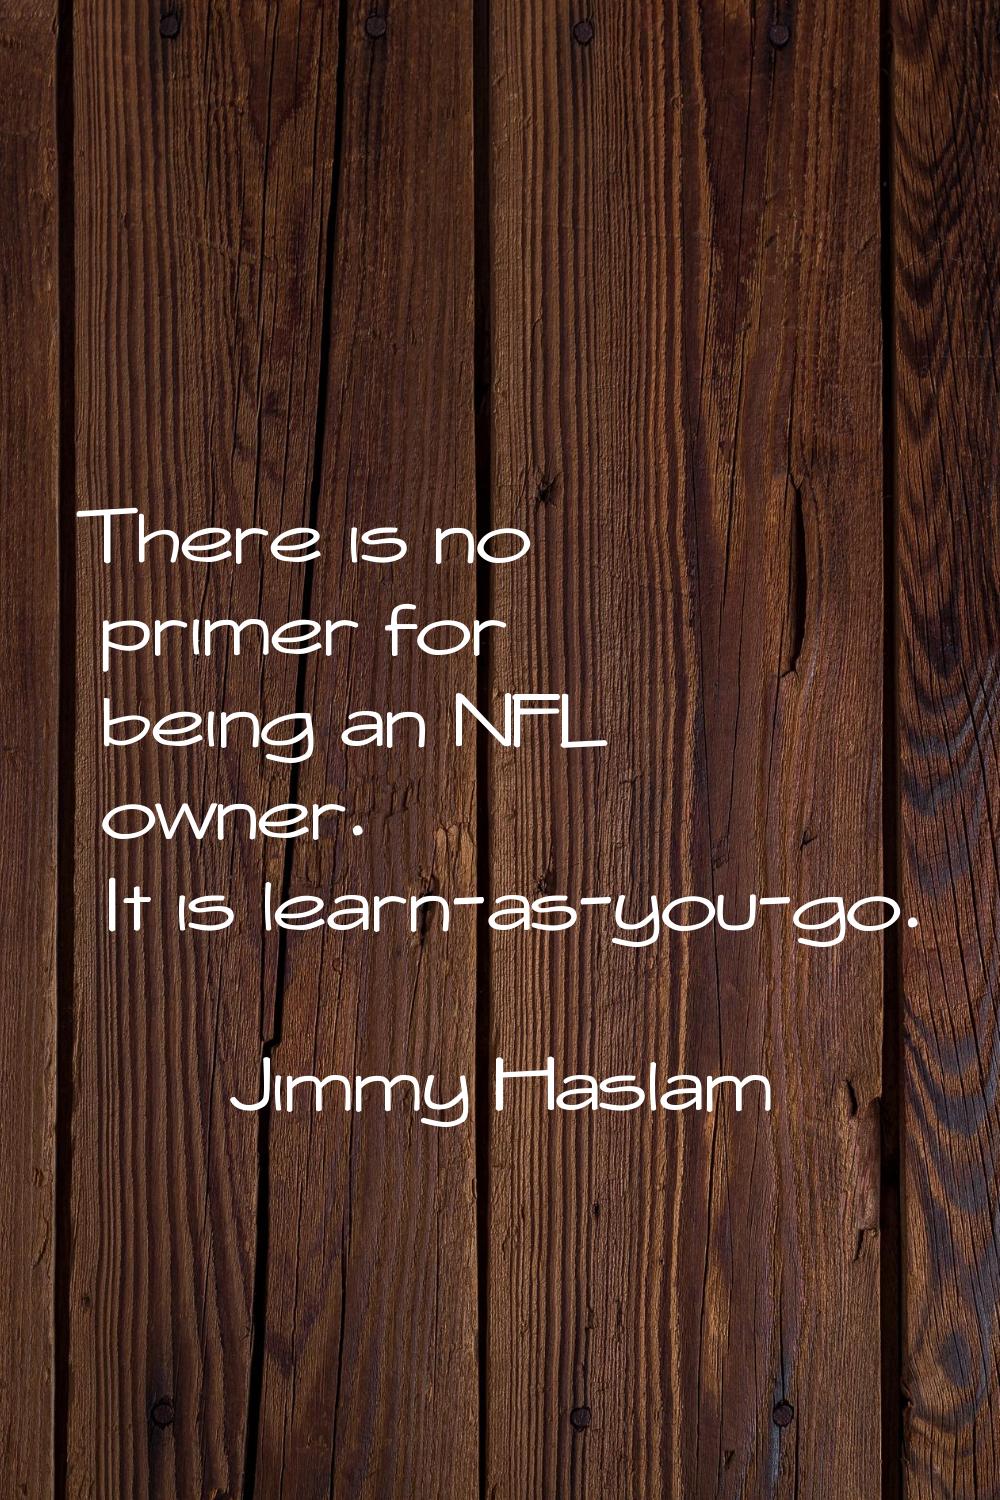 There is no primer for being an NFL owner. It is learn-as-you-go.